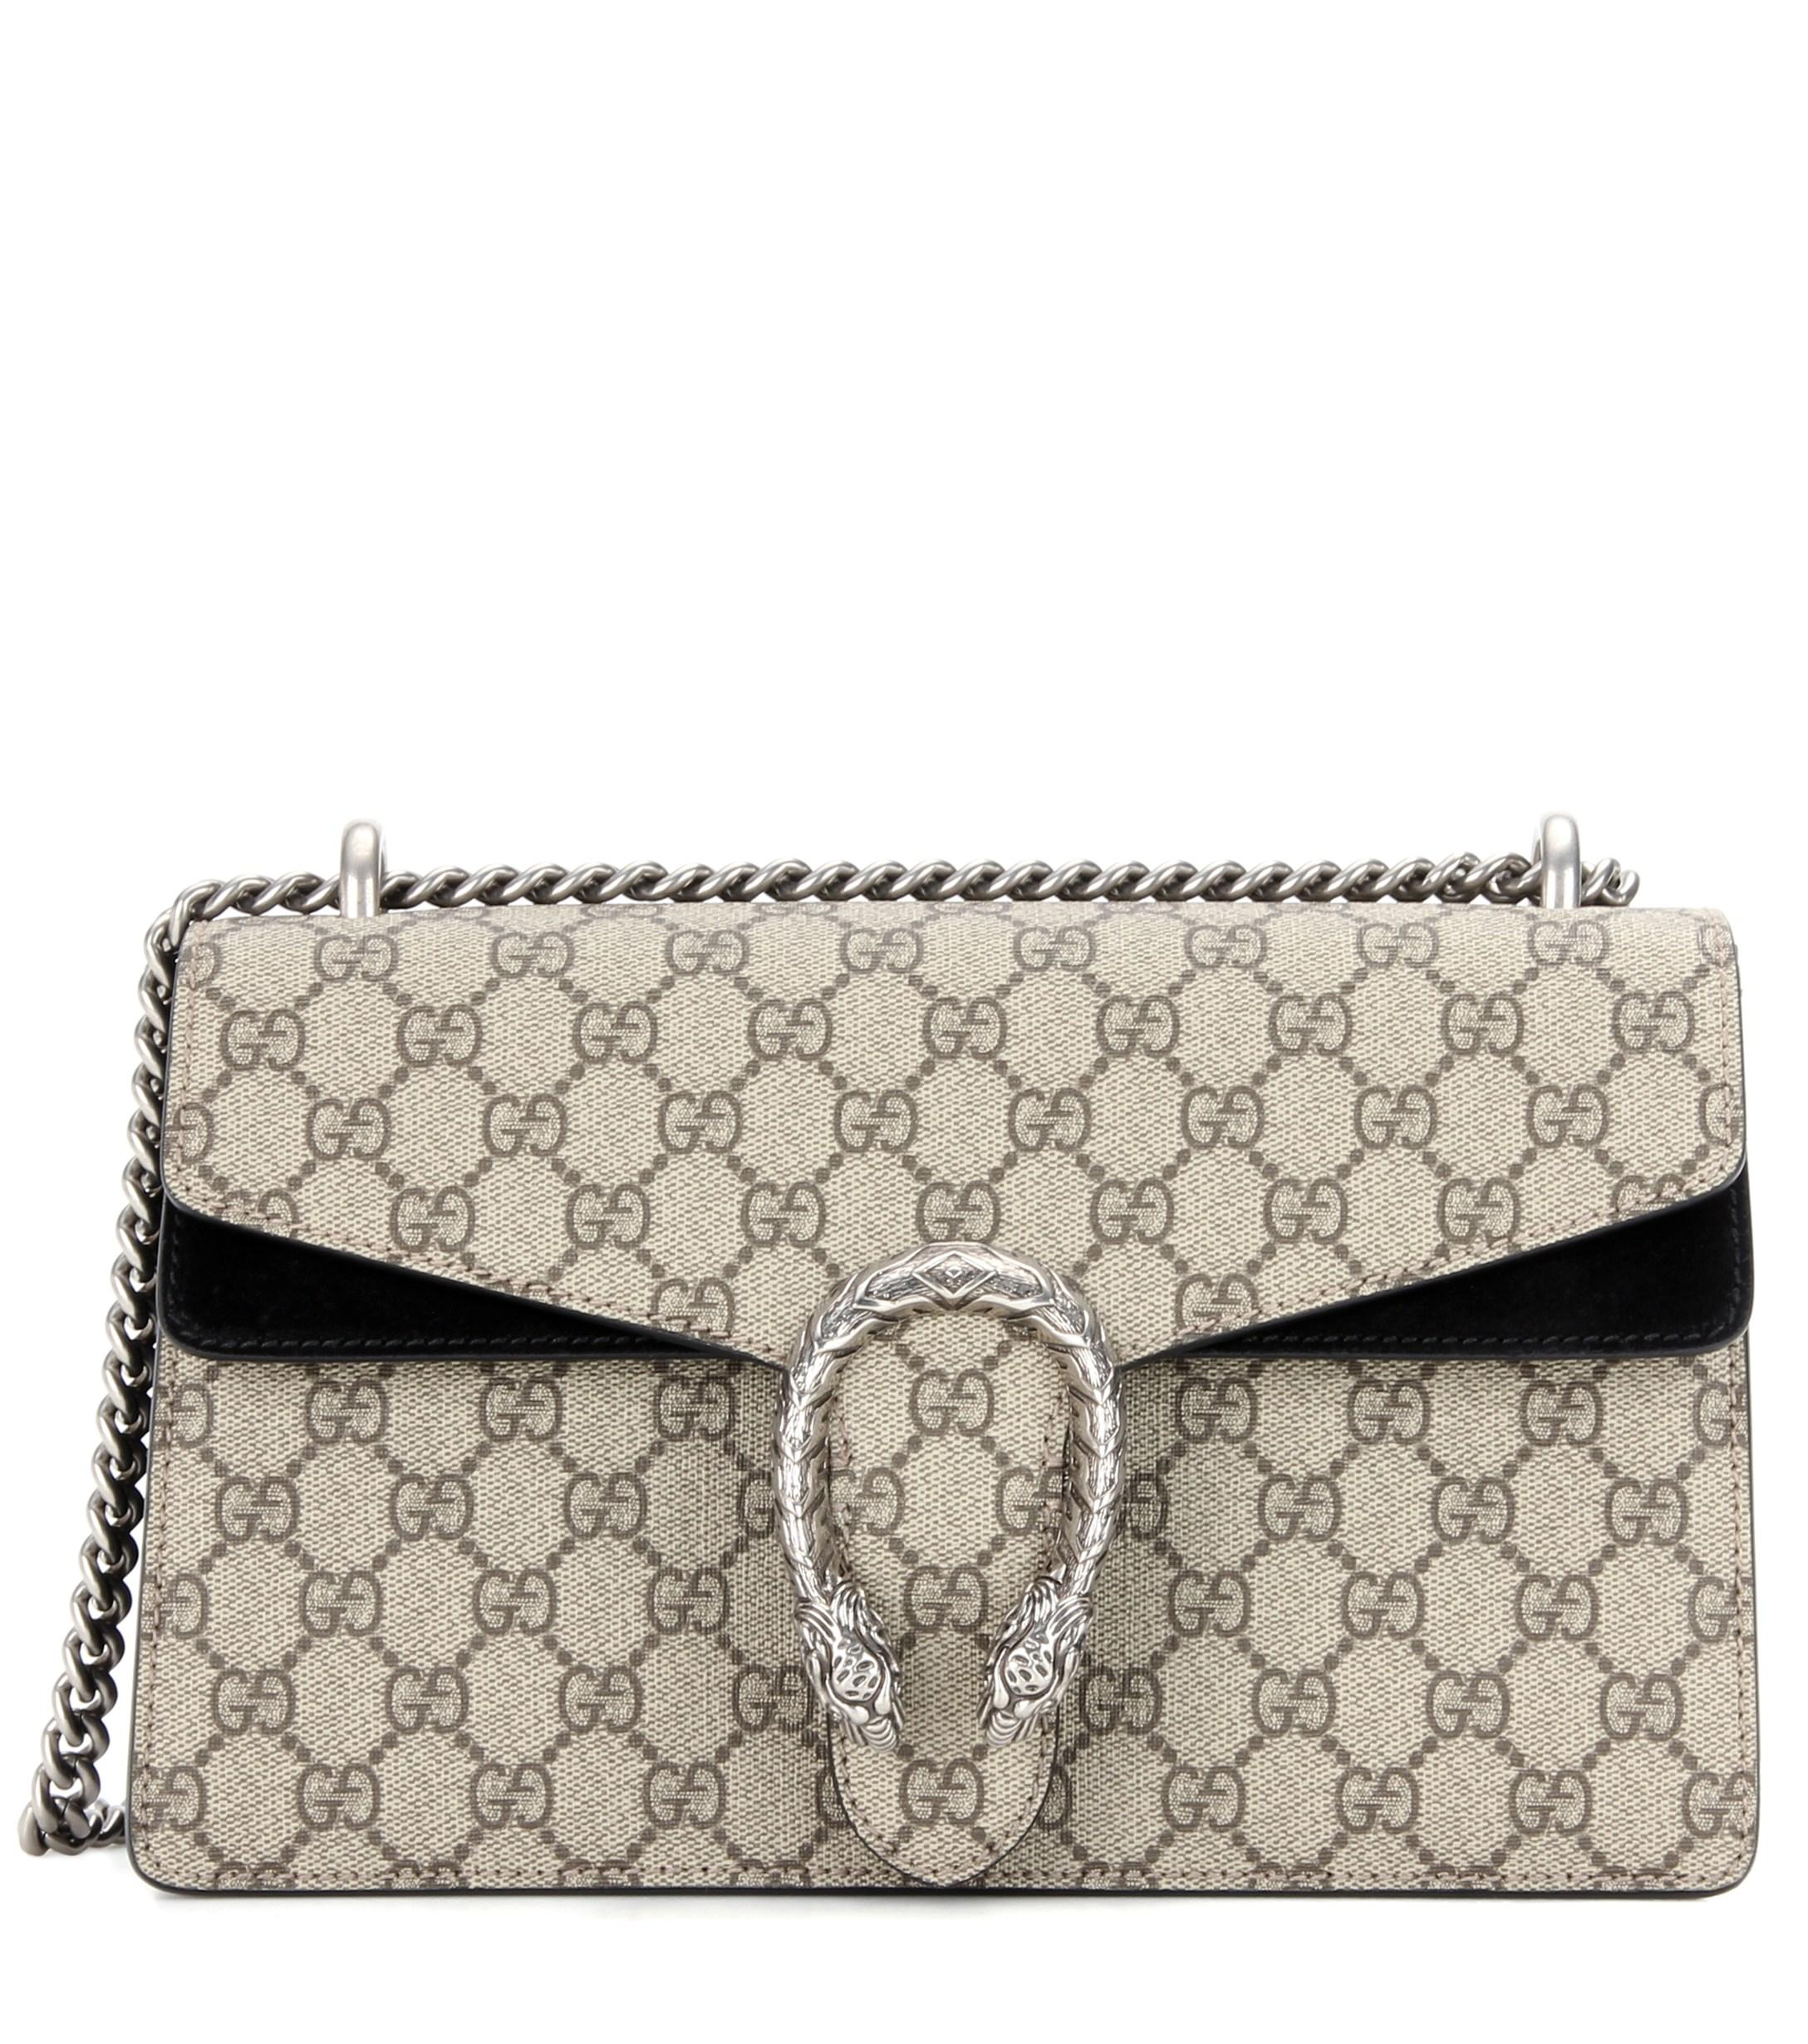 Gucci Canvas Dionysus GG Supreme Small Shoulder Bag in Beige (Natural) - Lyst